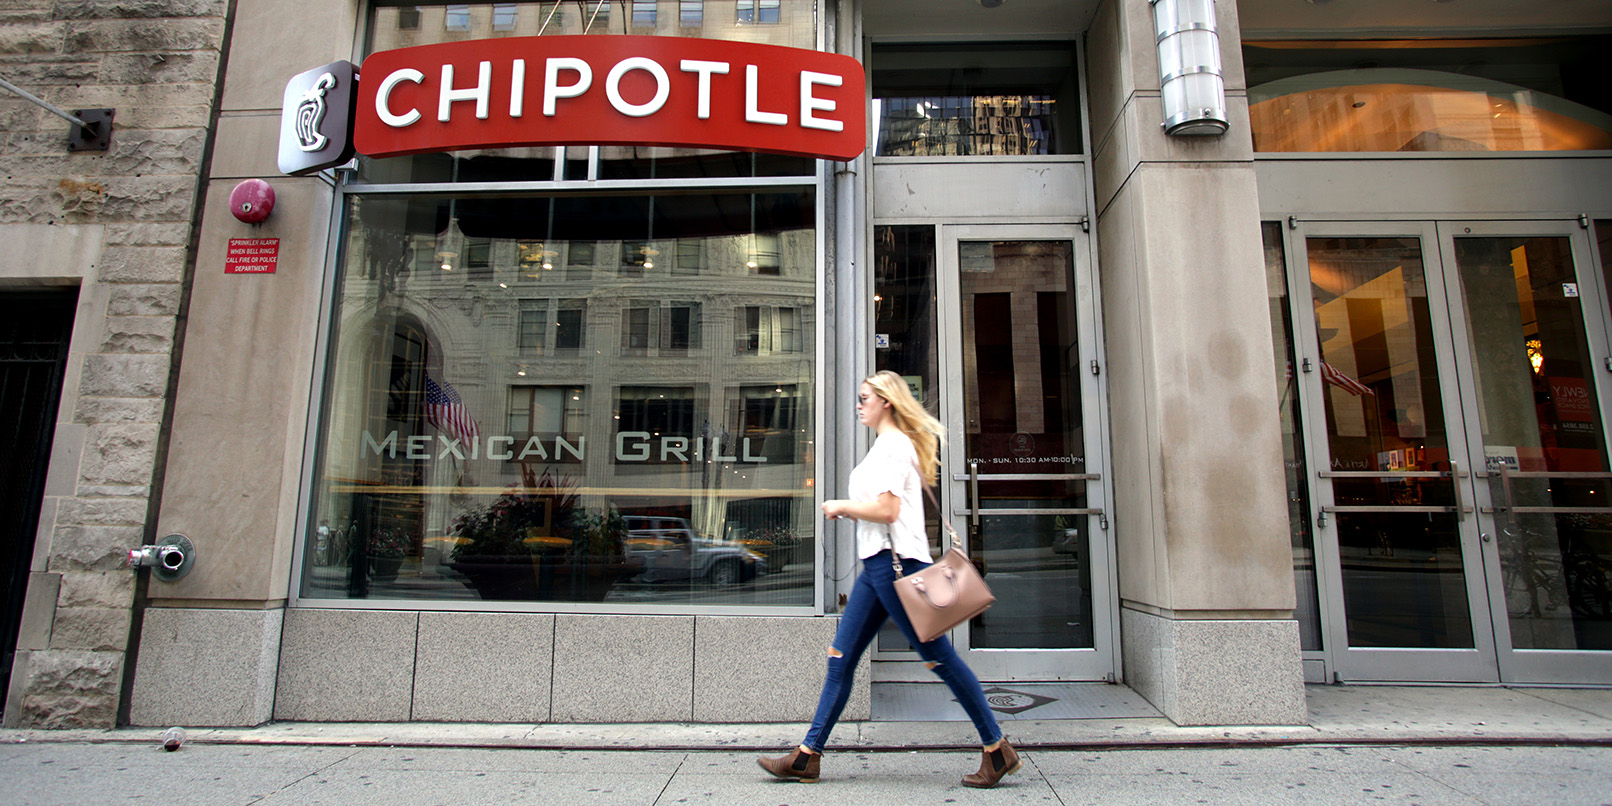 photo of Chipotle reports hackers stole credit card info using malware image